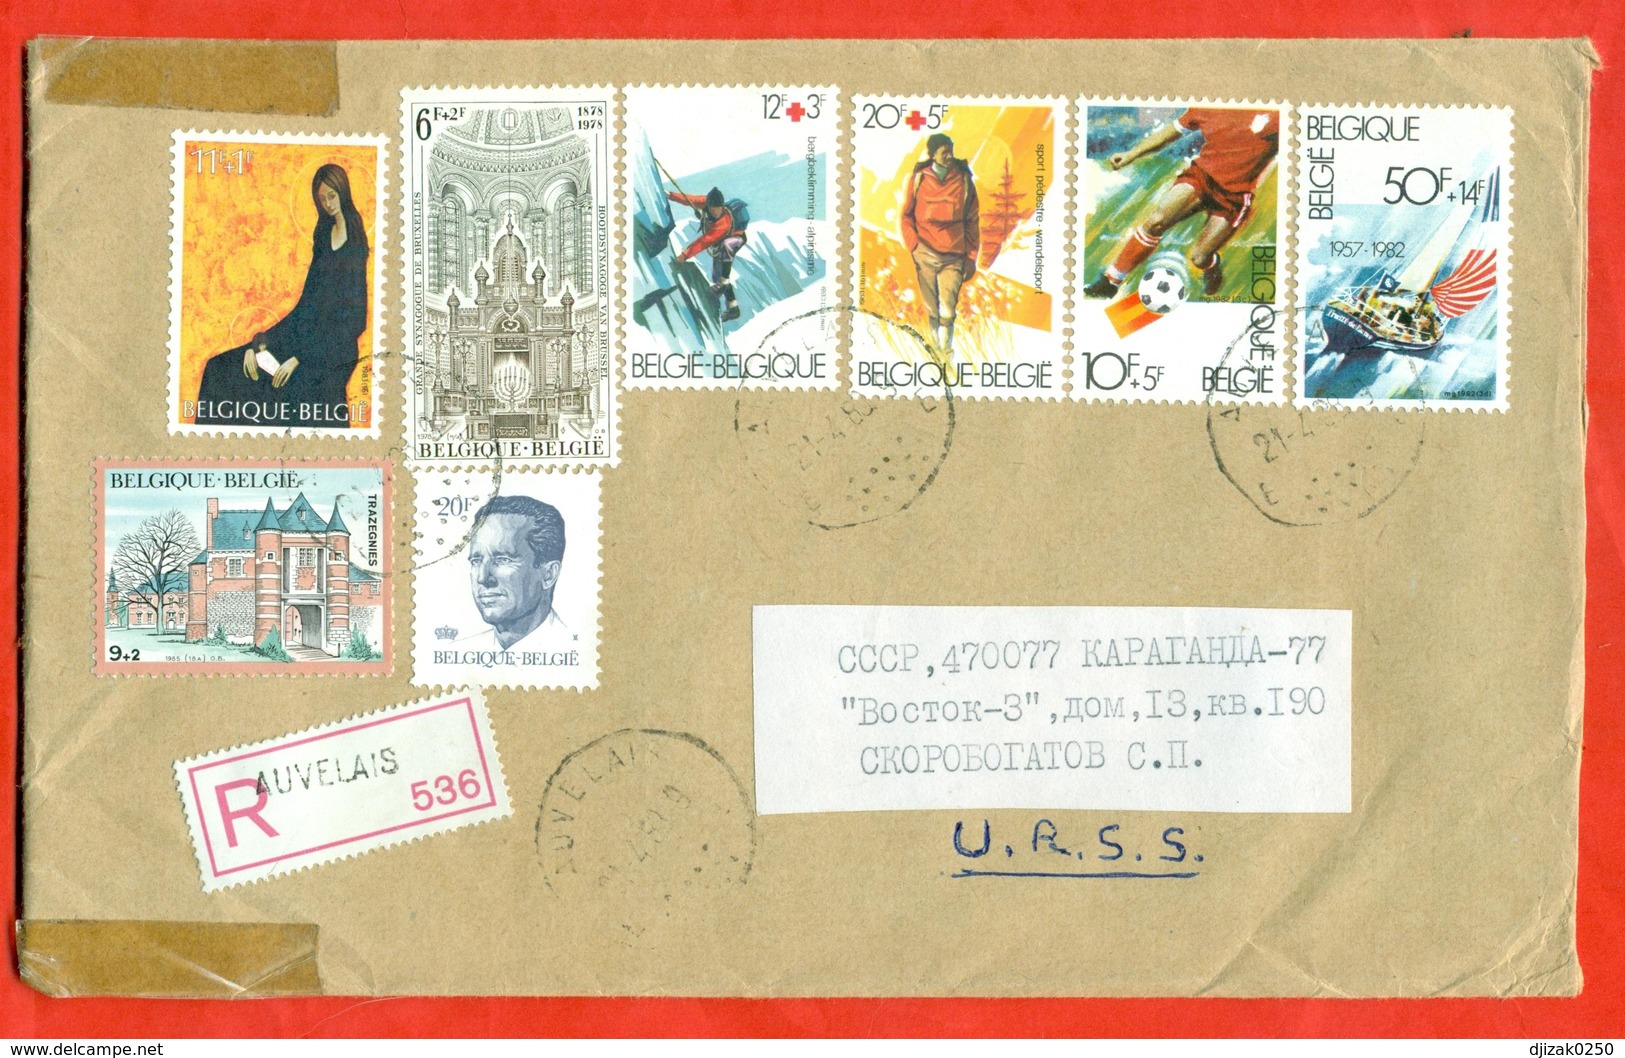 Belgium 1985. Sport, Art, Castle. Registered Envelope Passed The Mail. - Covers & Documents